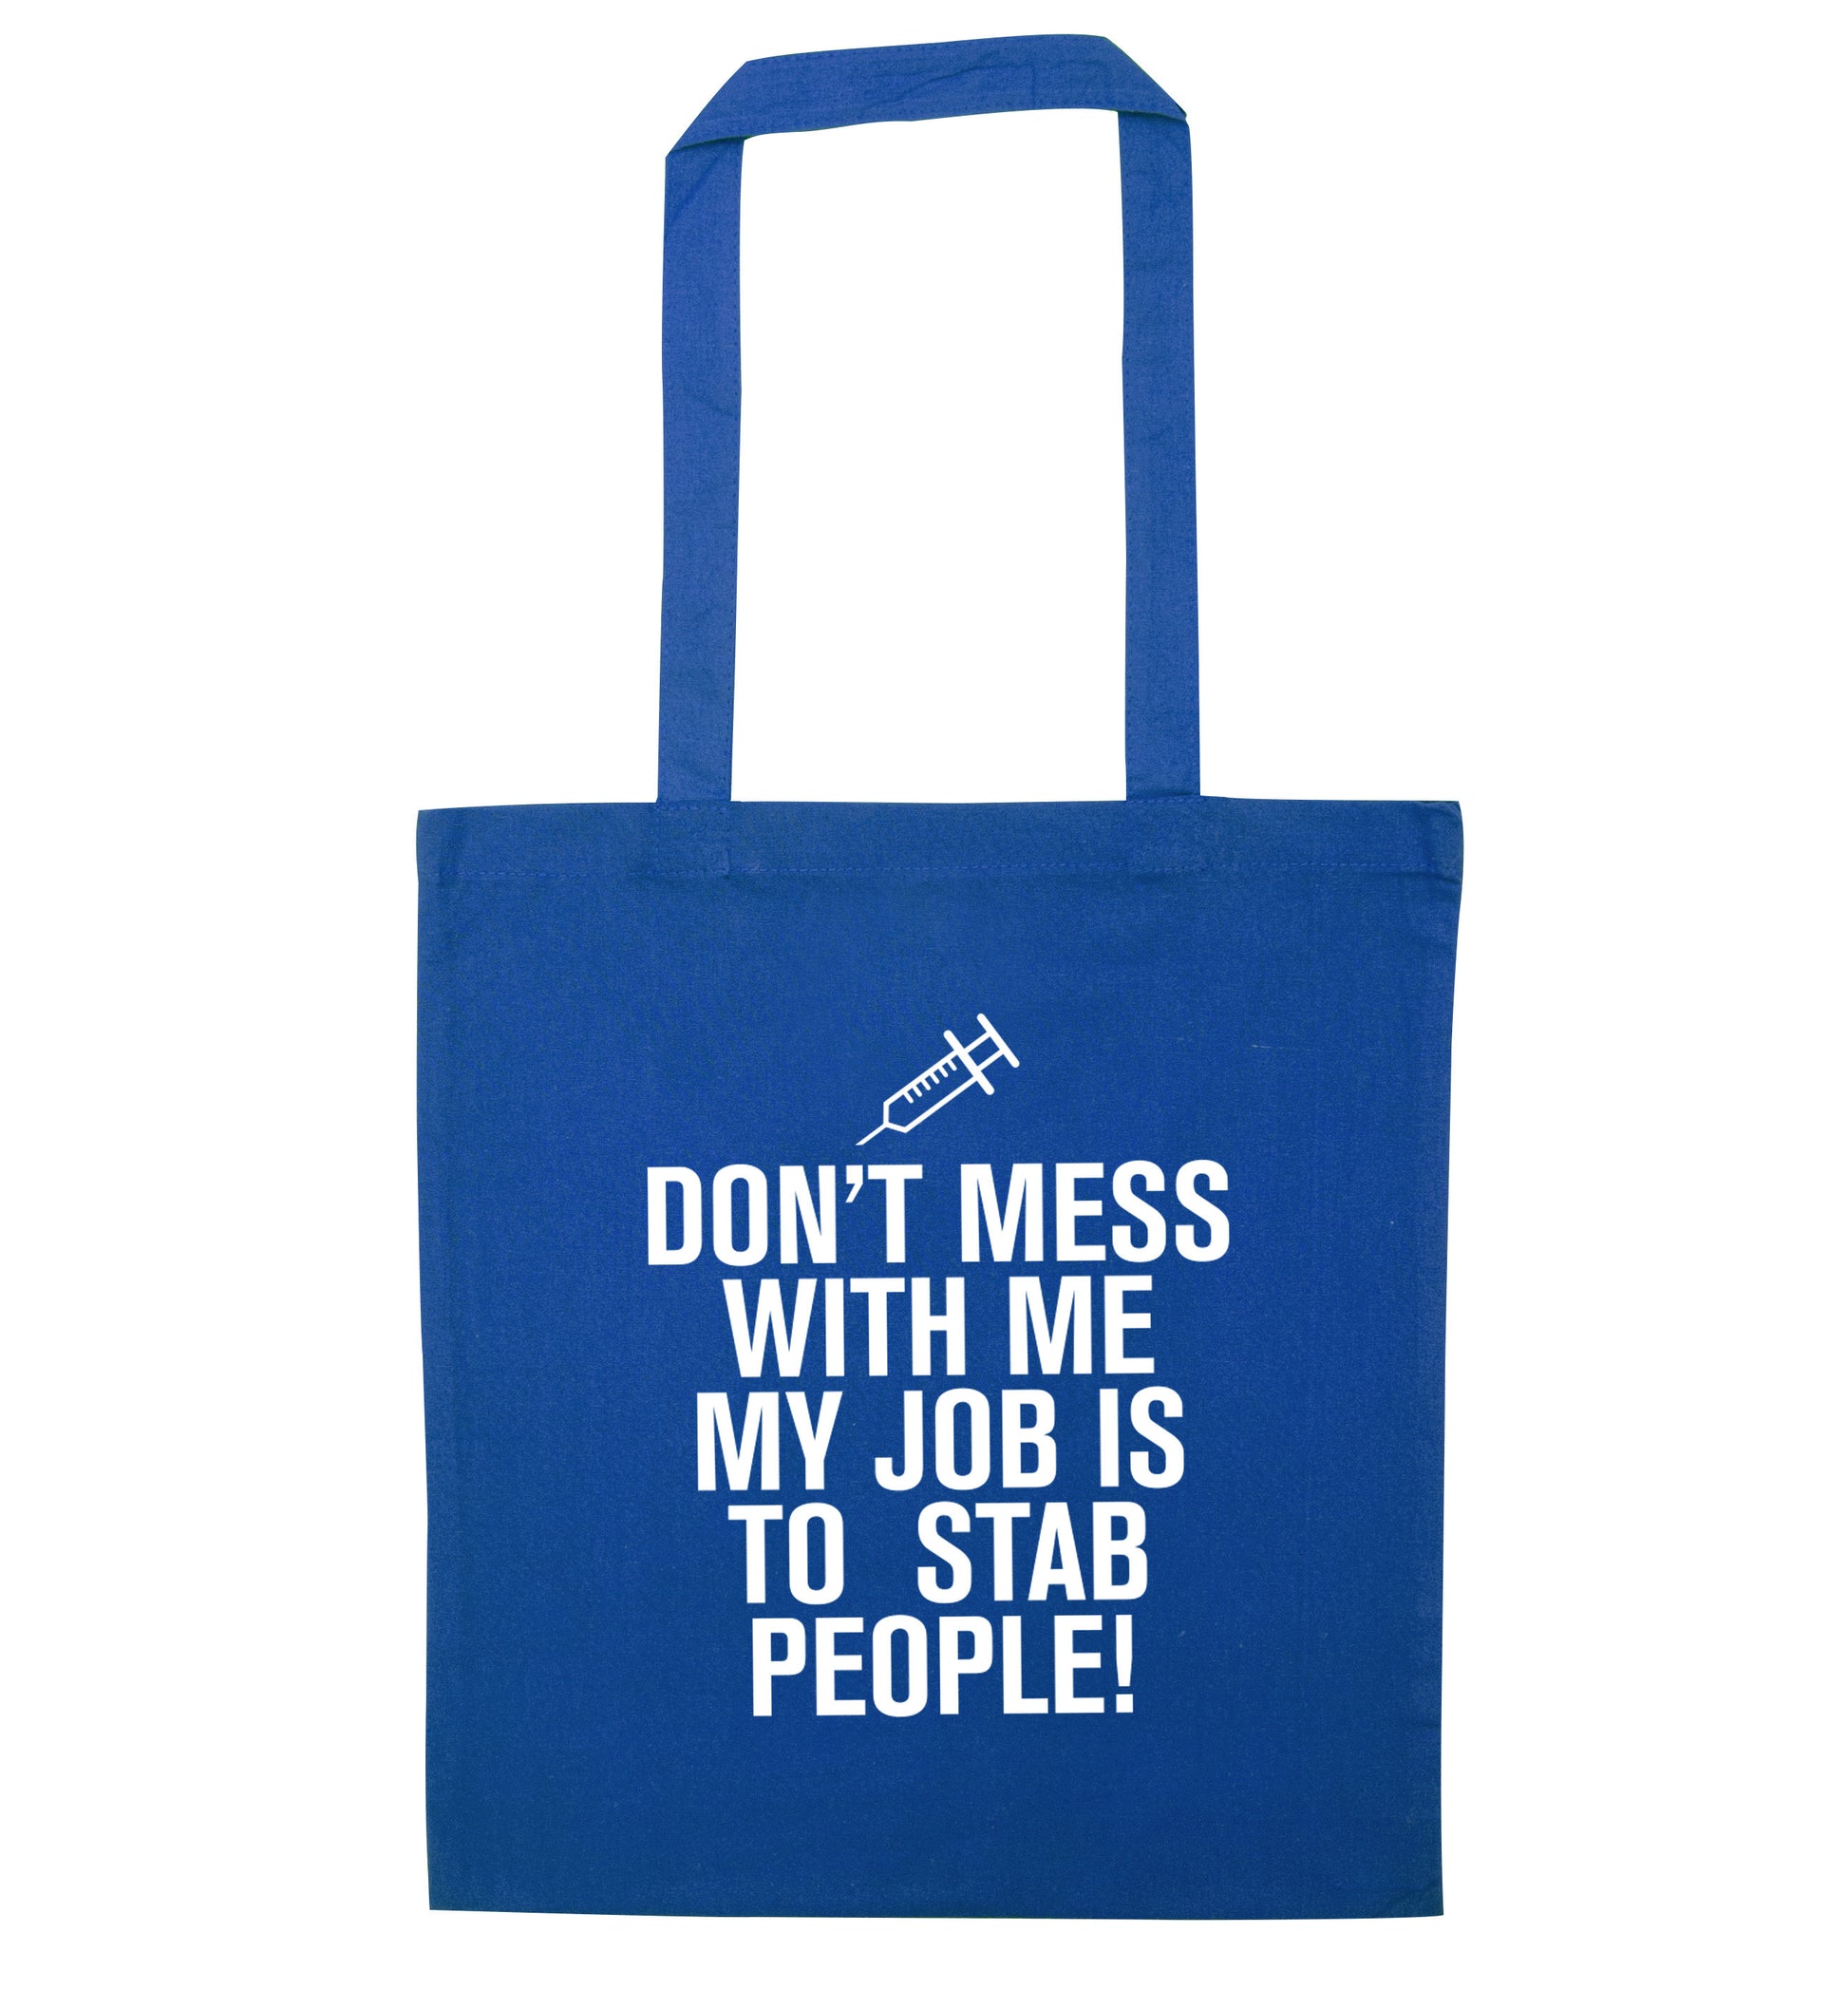 Don't mess with me my job is to stab people! blue tote bag